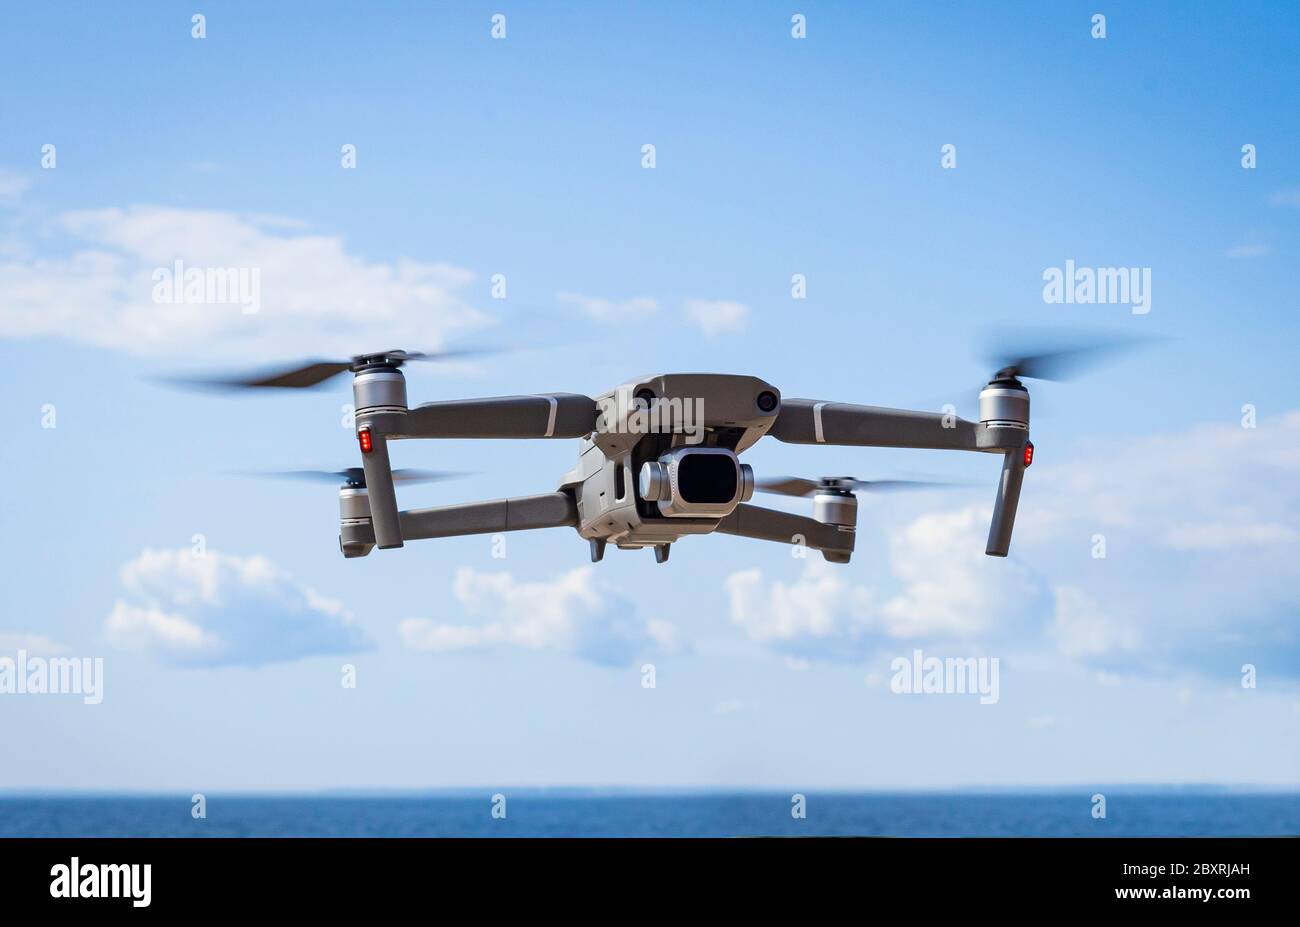 Modern Drone hovering in nature on the seashore over the beach and blue sky Stock Photo